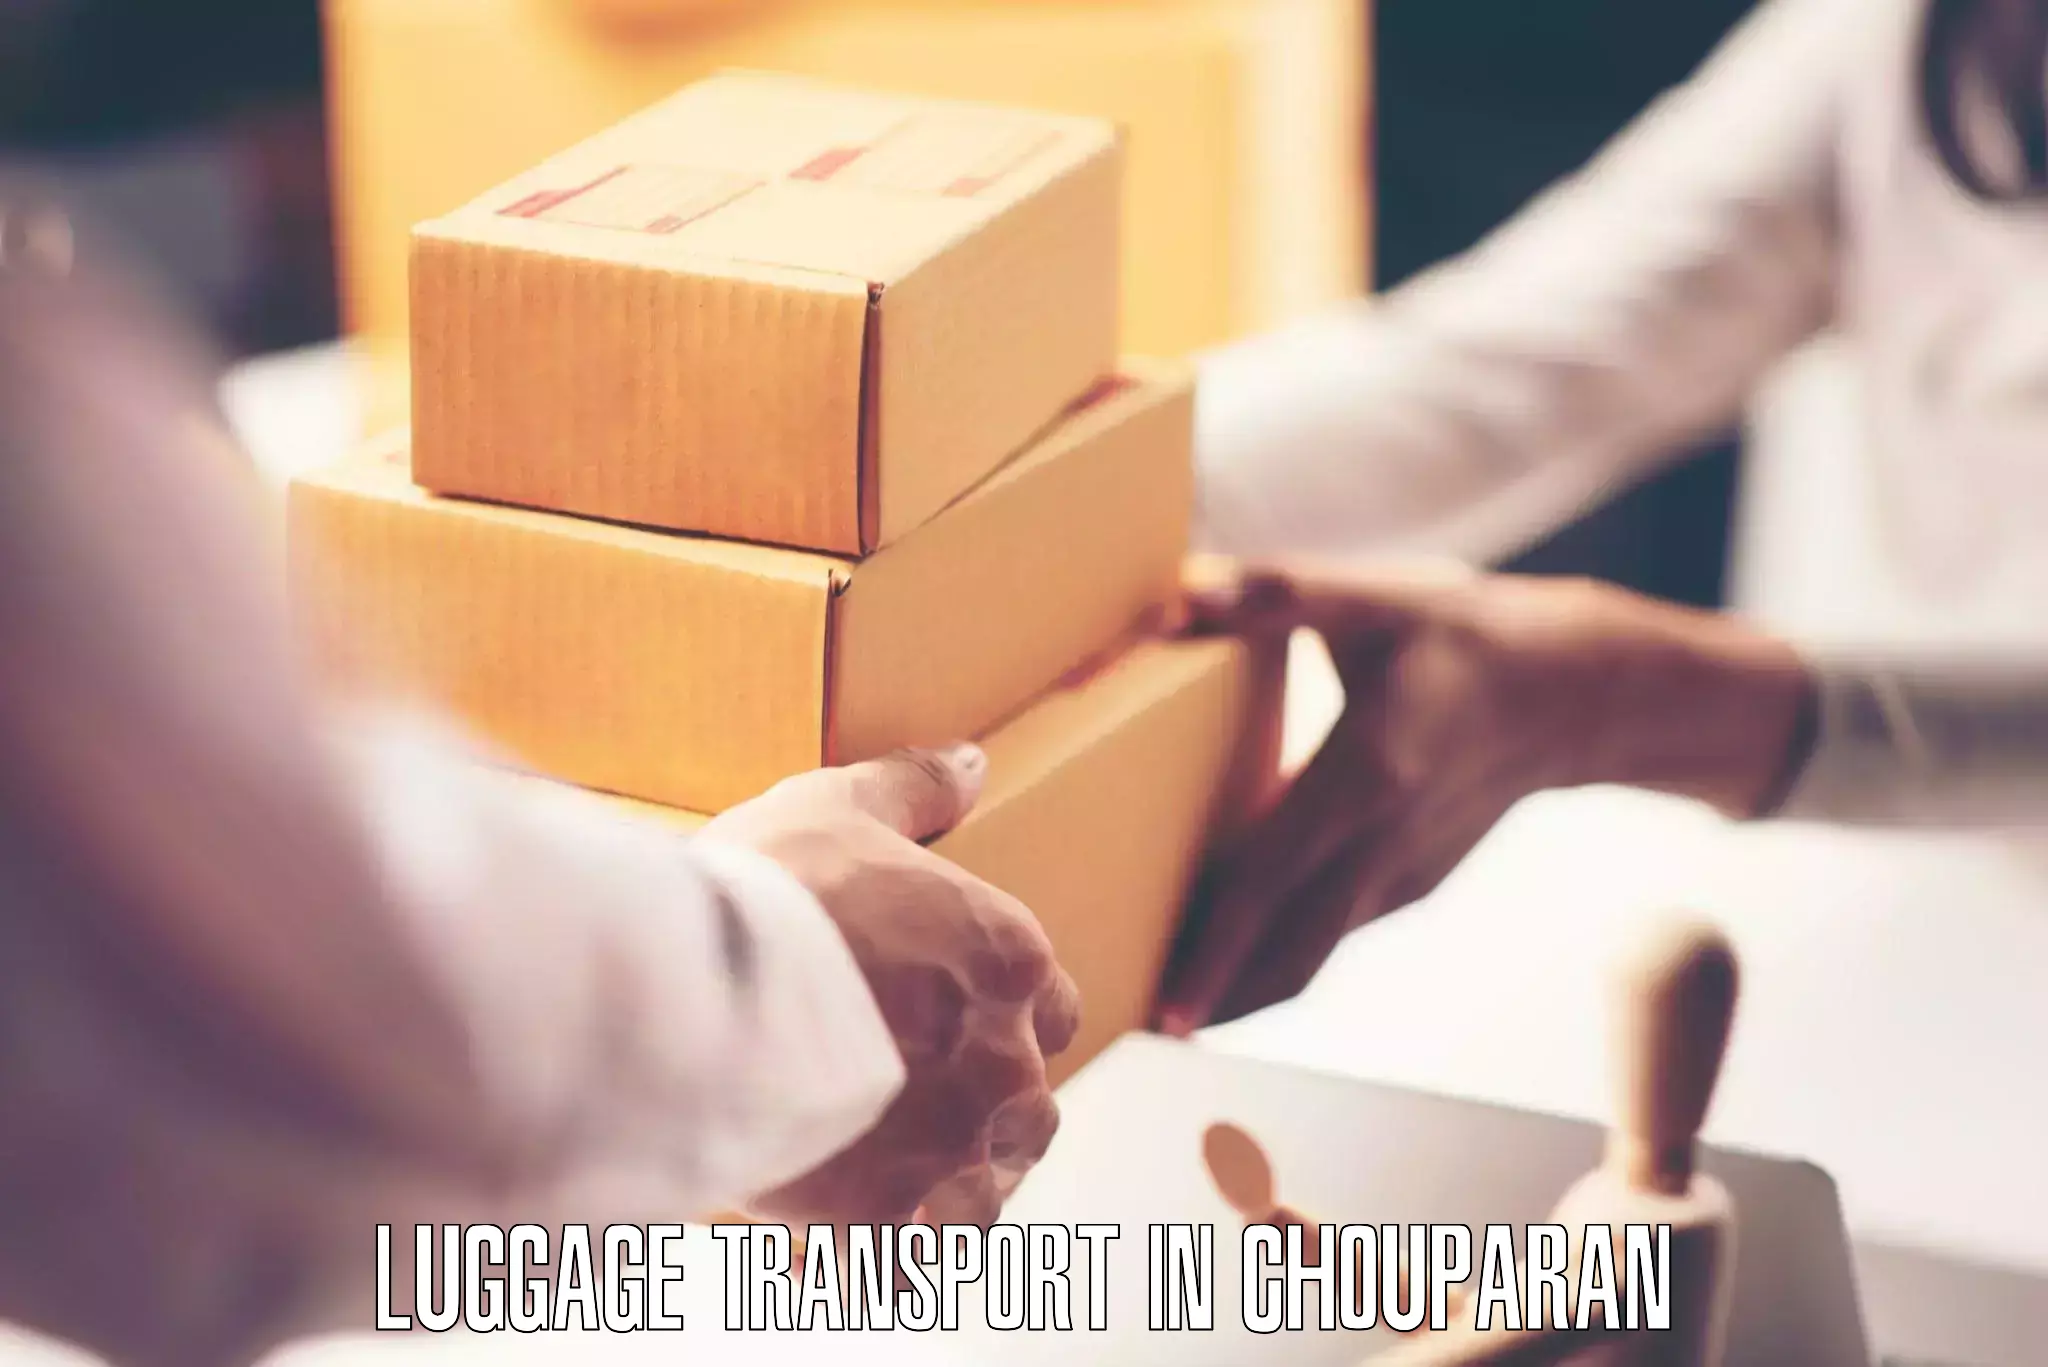 Luggage transport guidelines in Chouparan